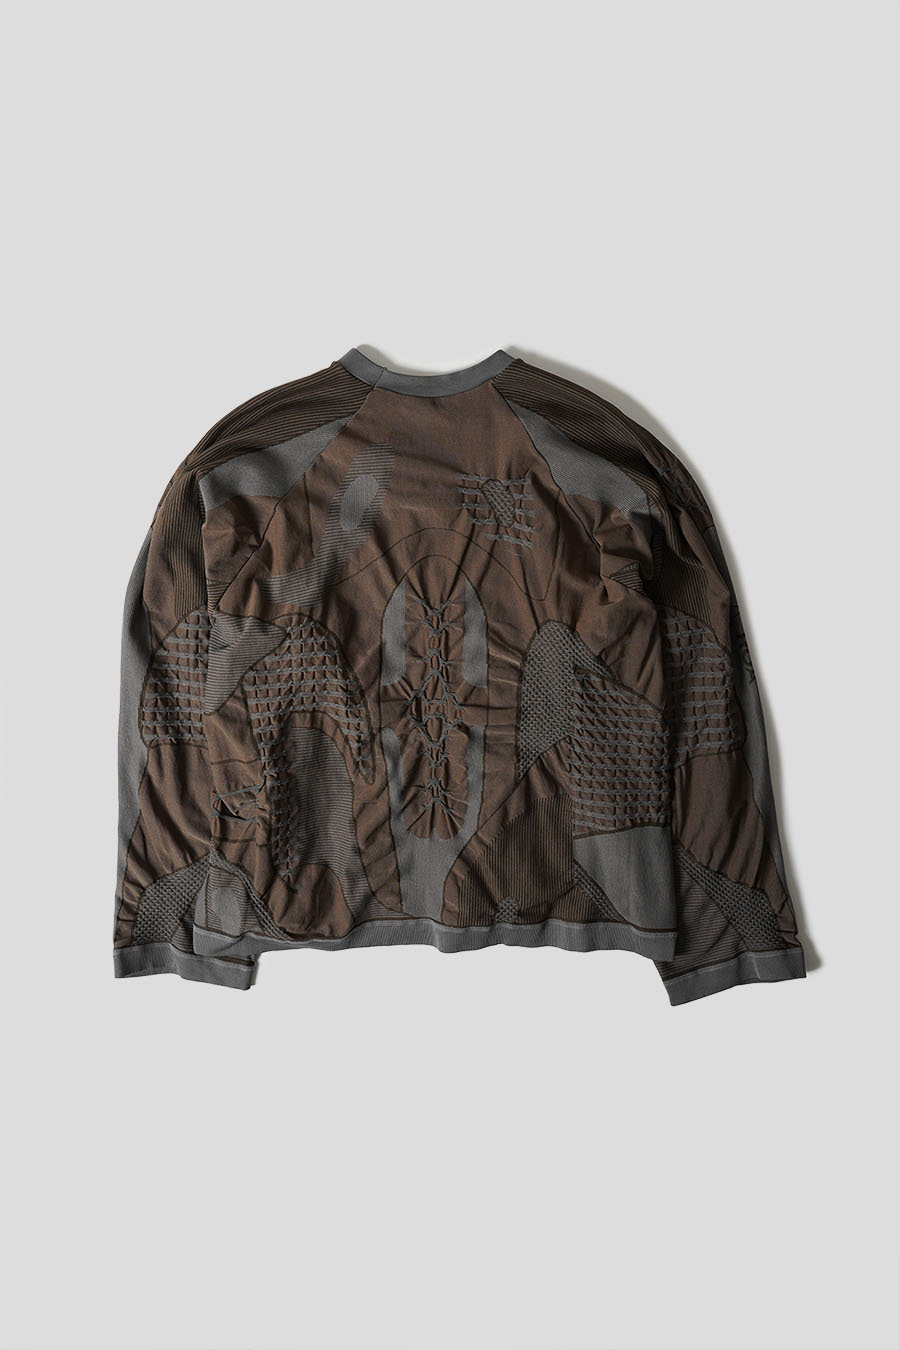 ROA HIKING - BROWN AND GREY 3D OVERSIZED JUMPER